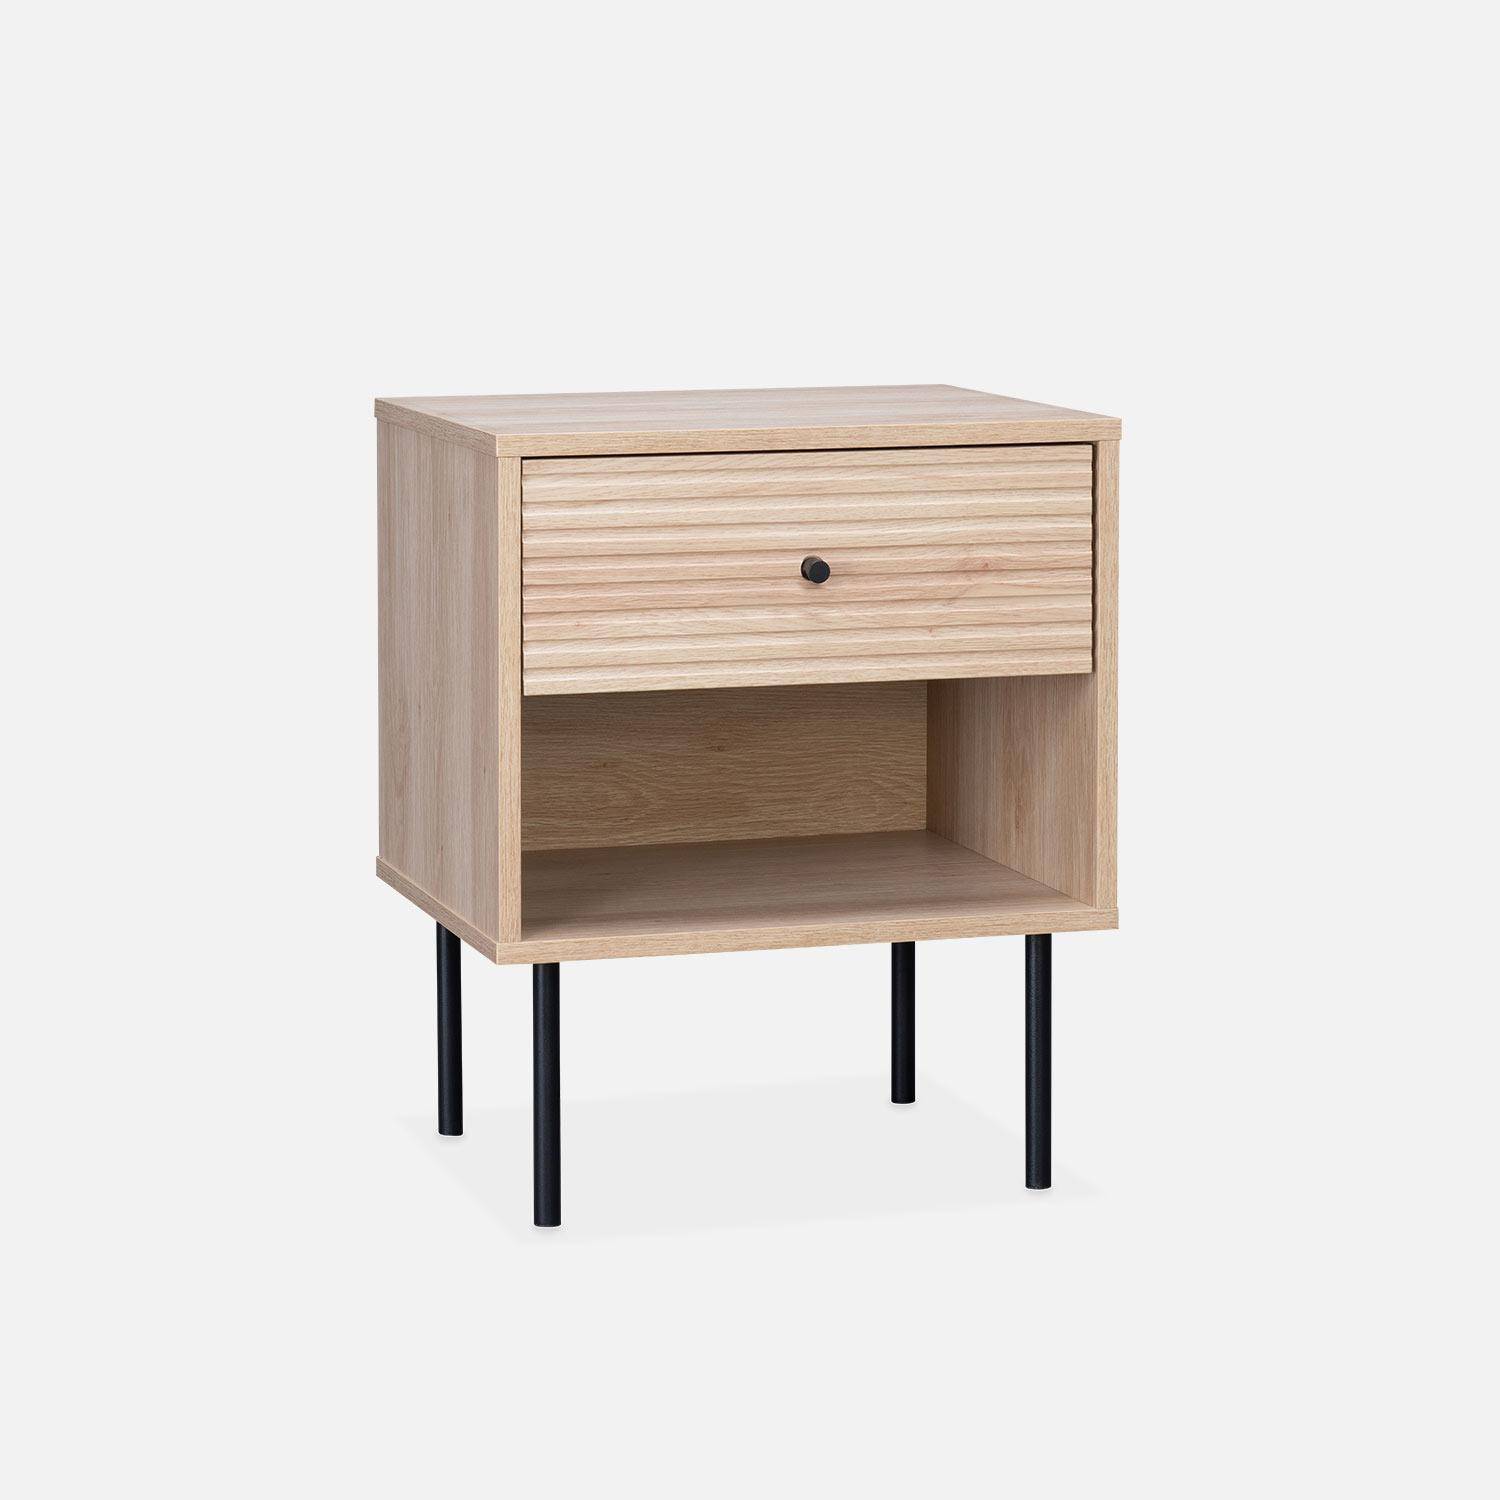 Grooved wood-effect bedside table, 45x39.5x55cm - Braga - Natural wood colour Photo3